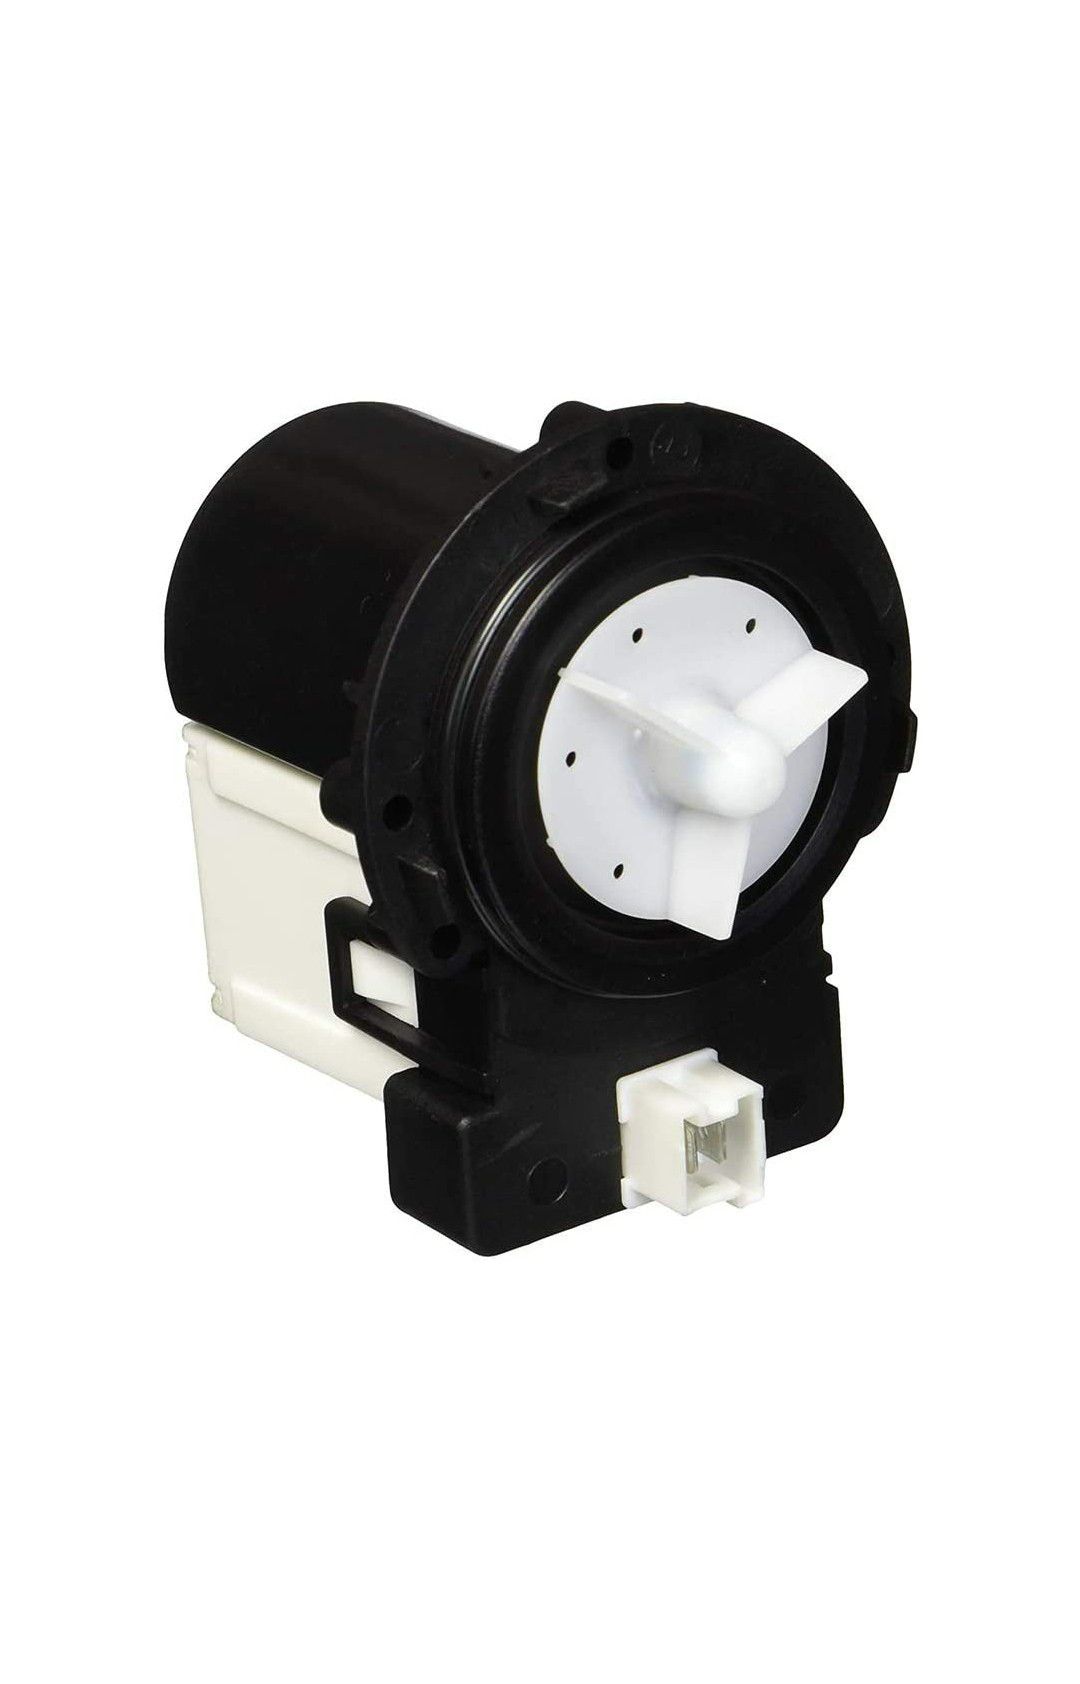 (JJ20) Ximoon DC31-00054A Washer Drain Pump Motor for Samsung DC3100054A DC31-00016A 62902090 PS4204638